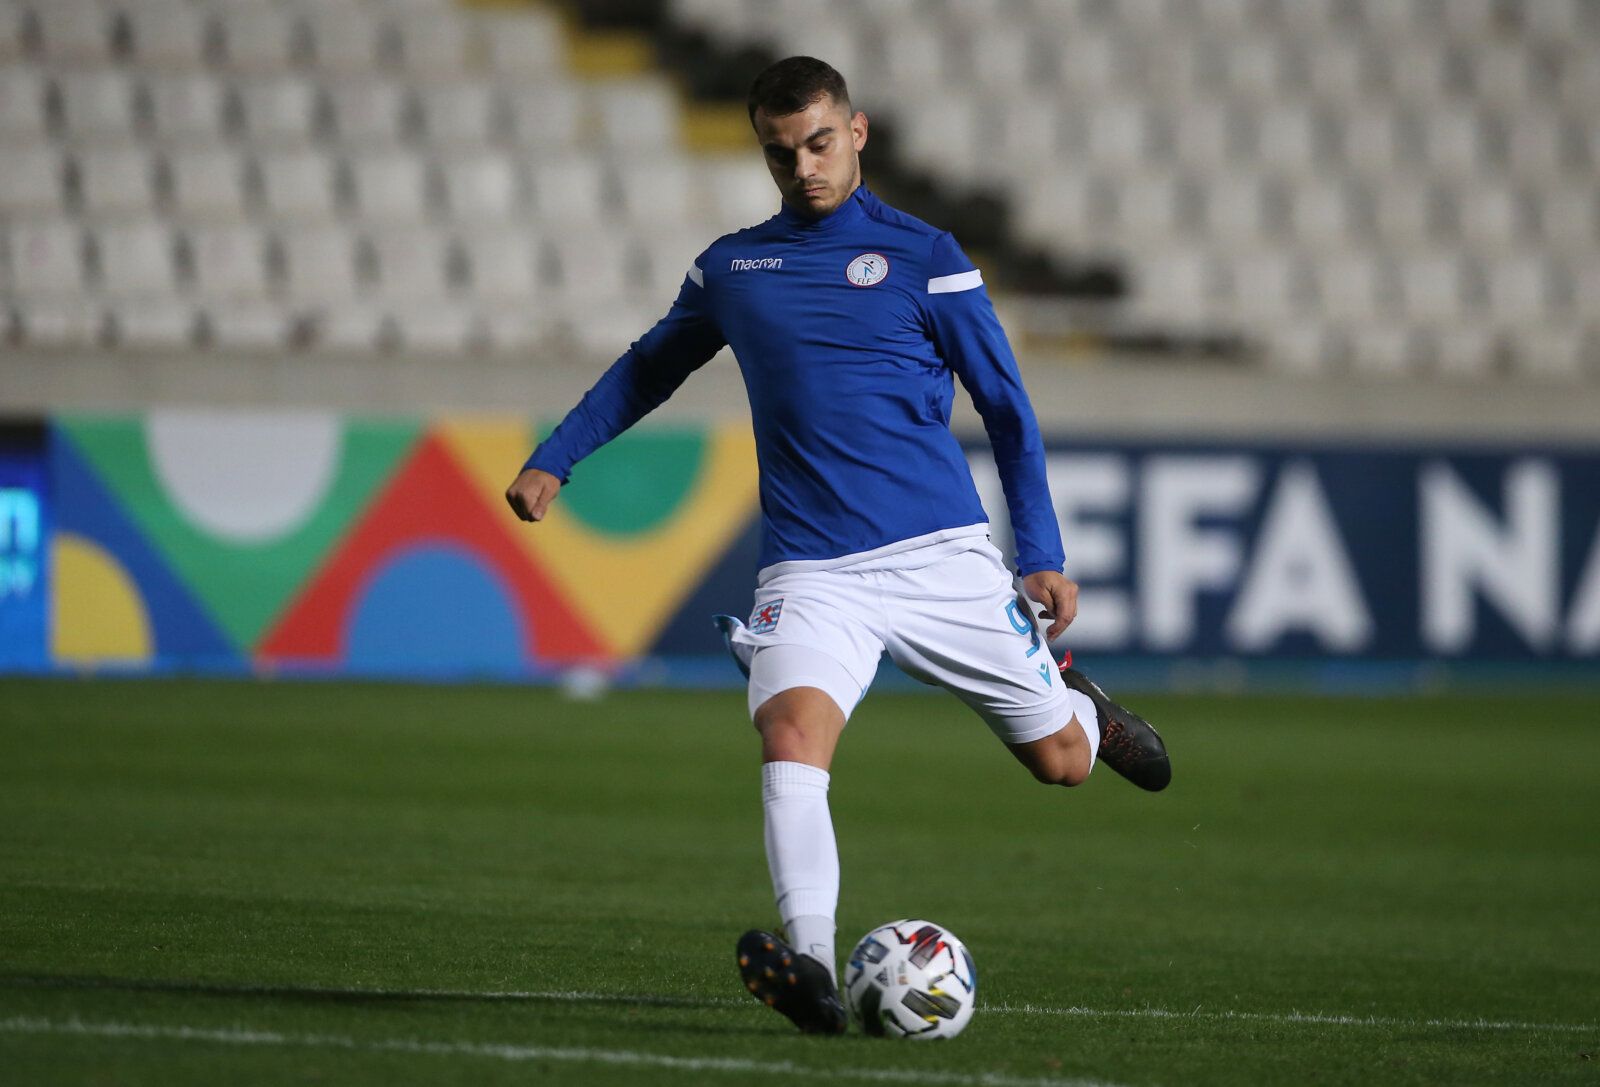 Soccer Football - UEFA Nations League - League C - Group 1 - Cyprus v Luxembourg - GSP Stadium, Strovolos, Cyprus - November 14, 2020 Luxembourg’s Danel Sinani during the warm up before the match REUTERS/Yiannis Kourtoglou